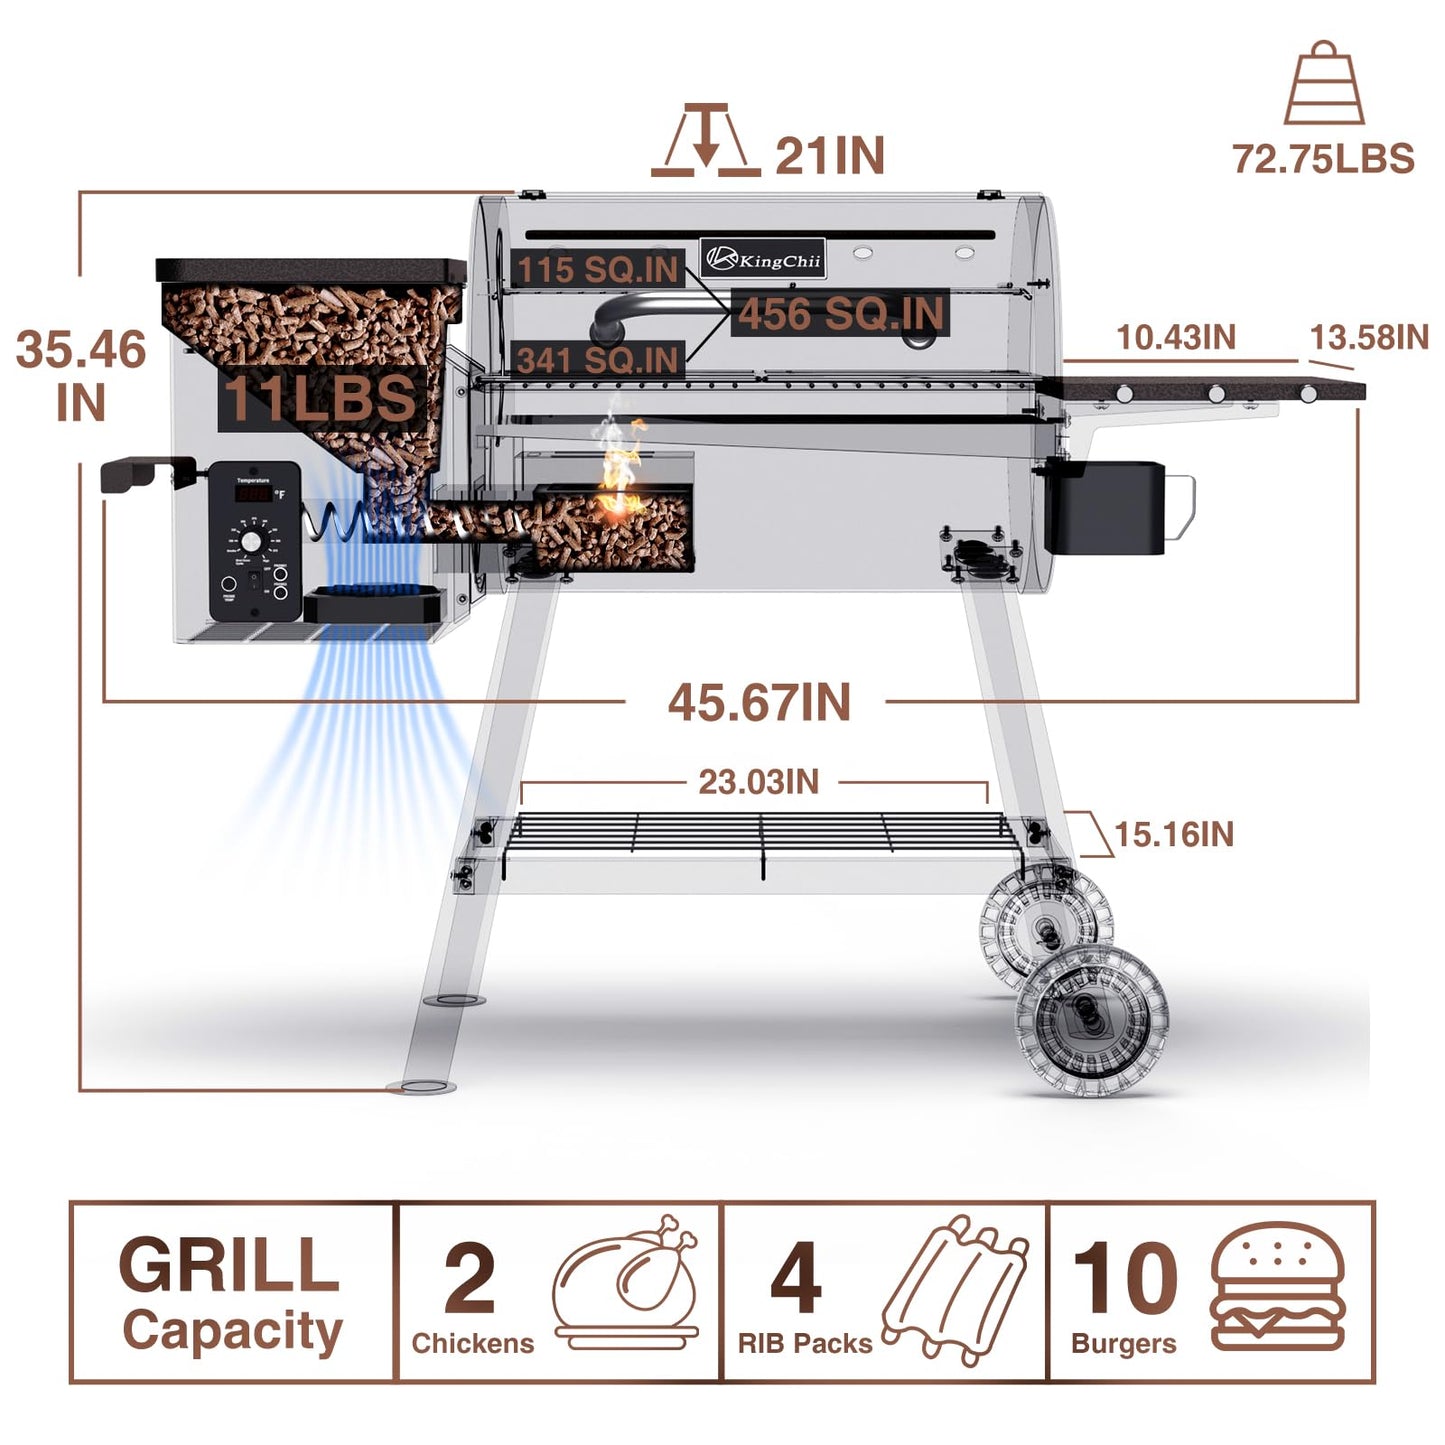 KingChii 456 SQ.IN Pellet Grill Smoker with Side Shelf, 8 IN 1 BBQ Grill with PID Temperature Control for Outdoor Cooking, BBQ Camping and Patio, Brown(Cover Including)